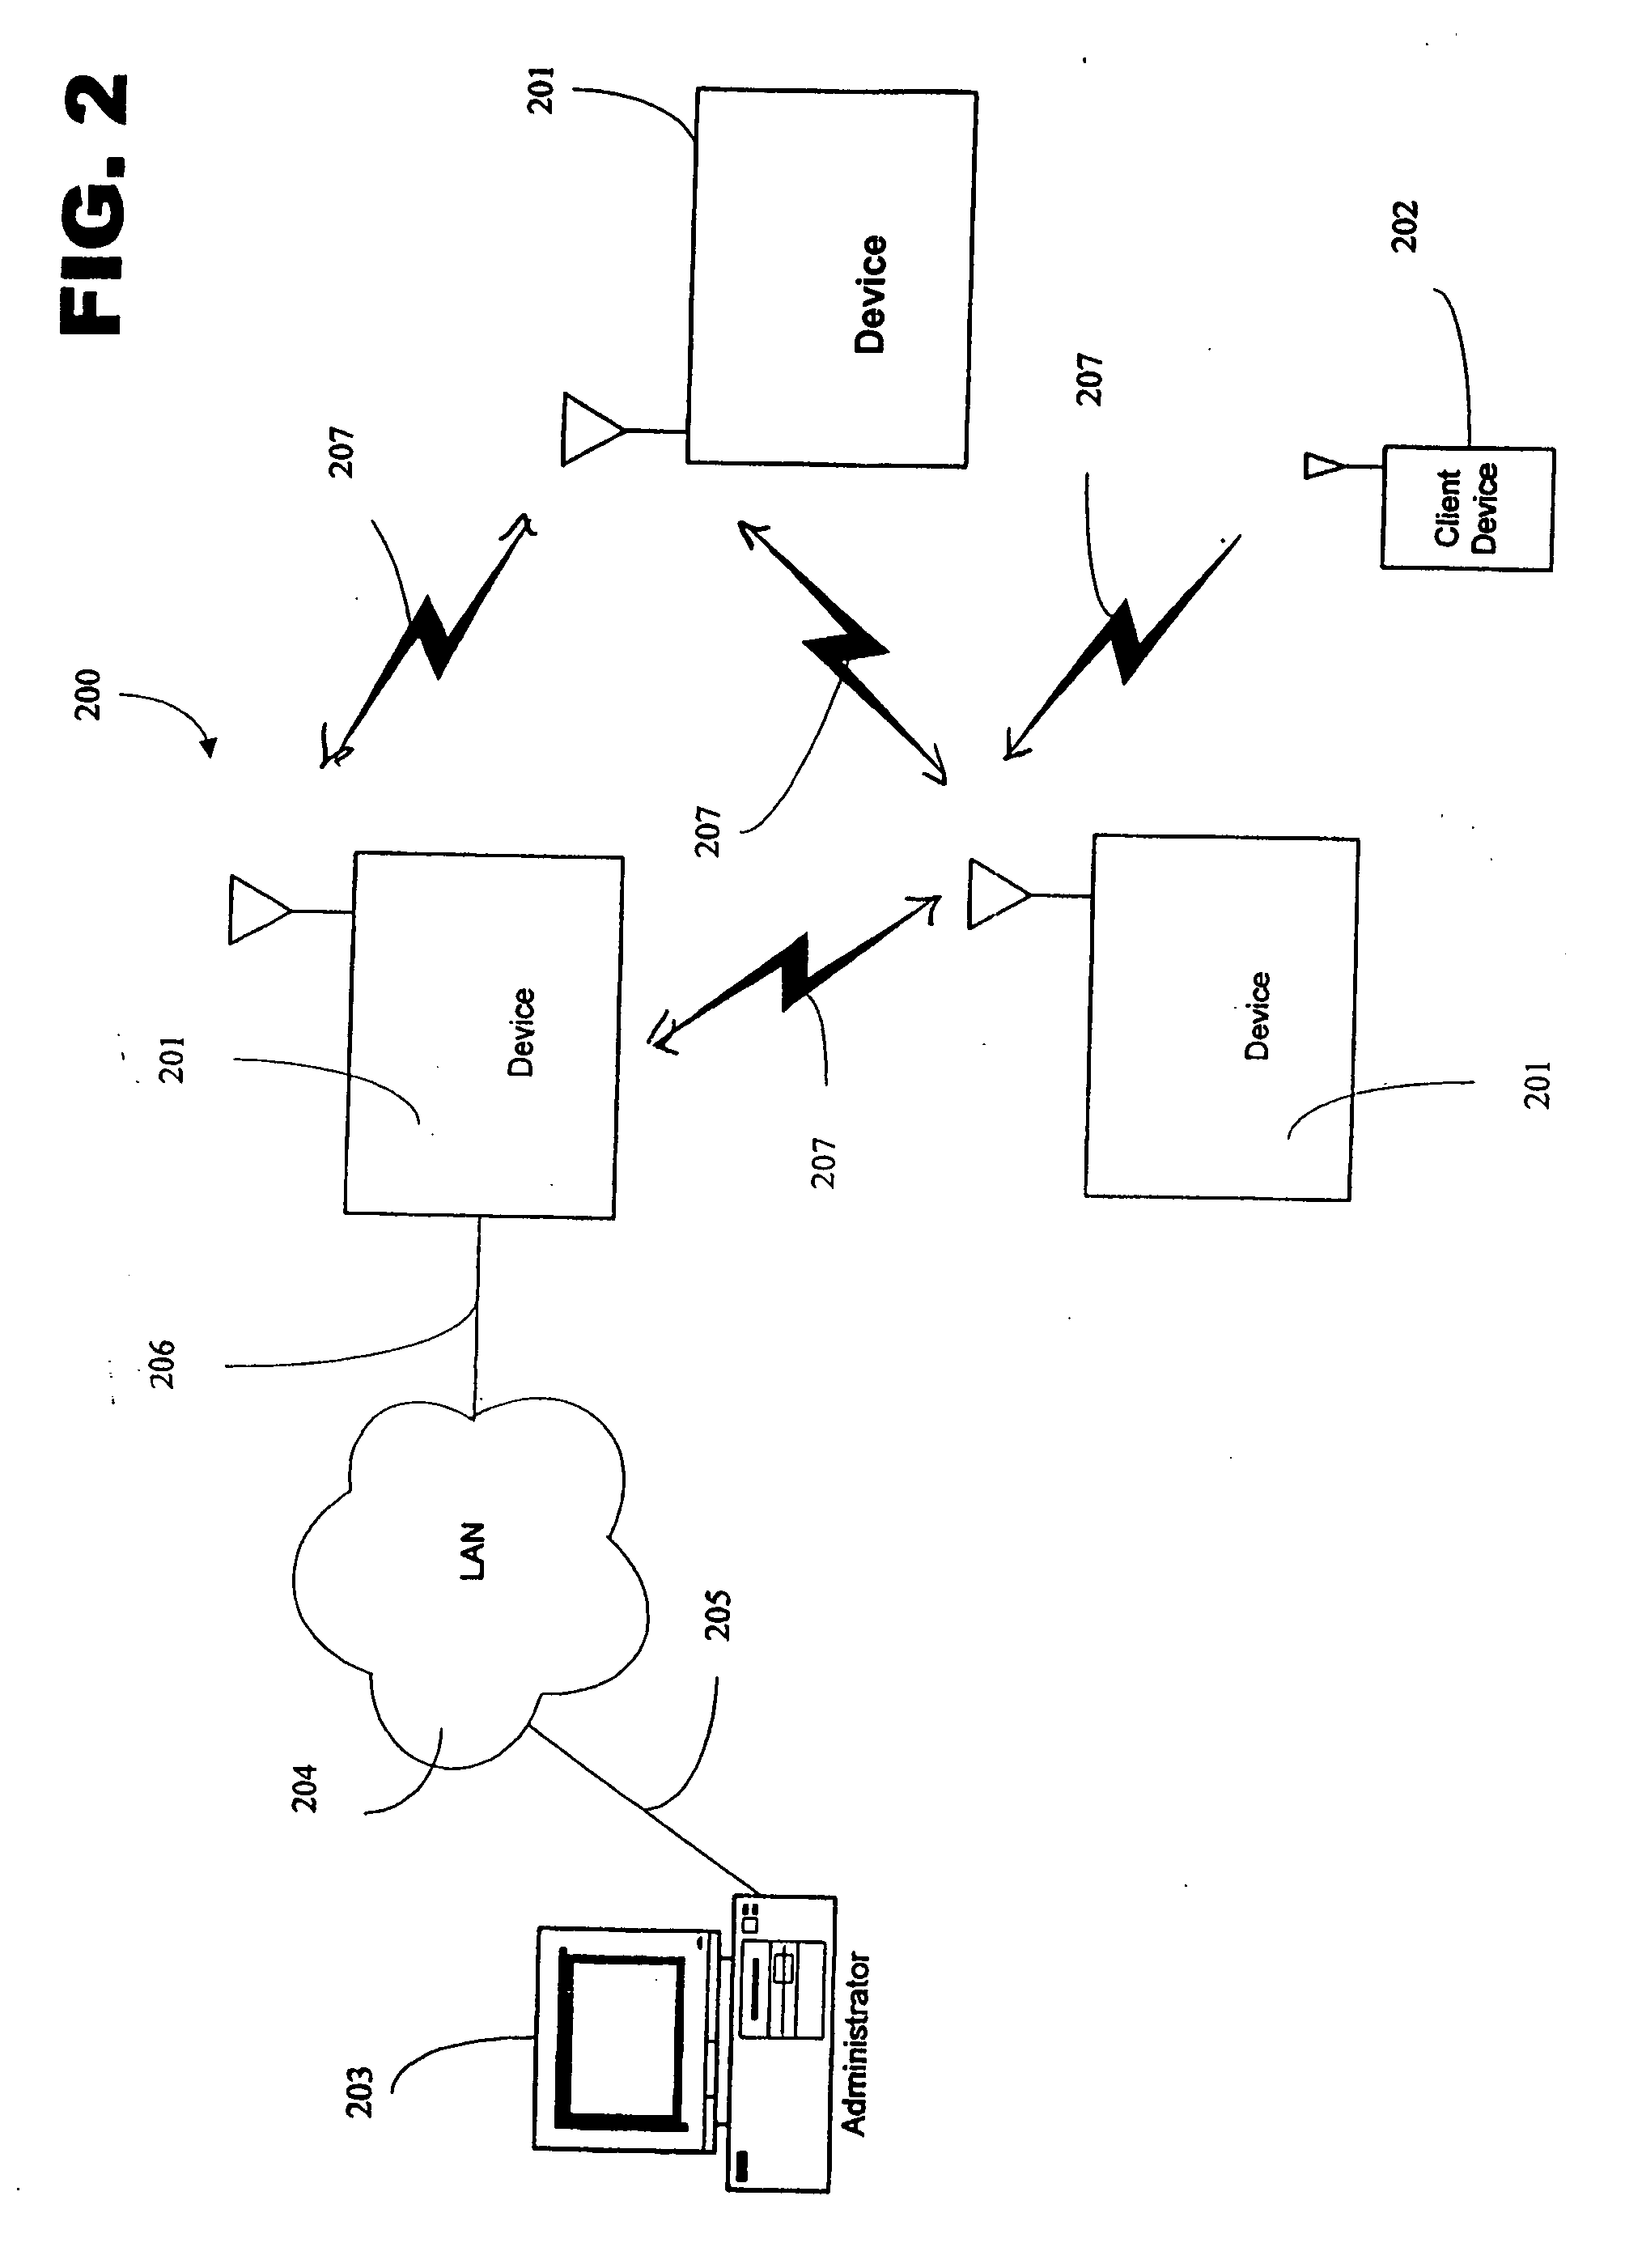 System and method for communication in a wireless mobile ad-hoc network